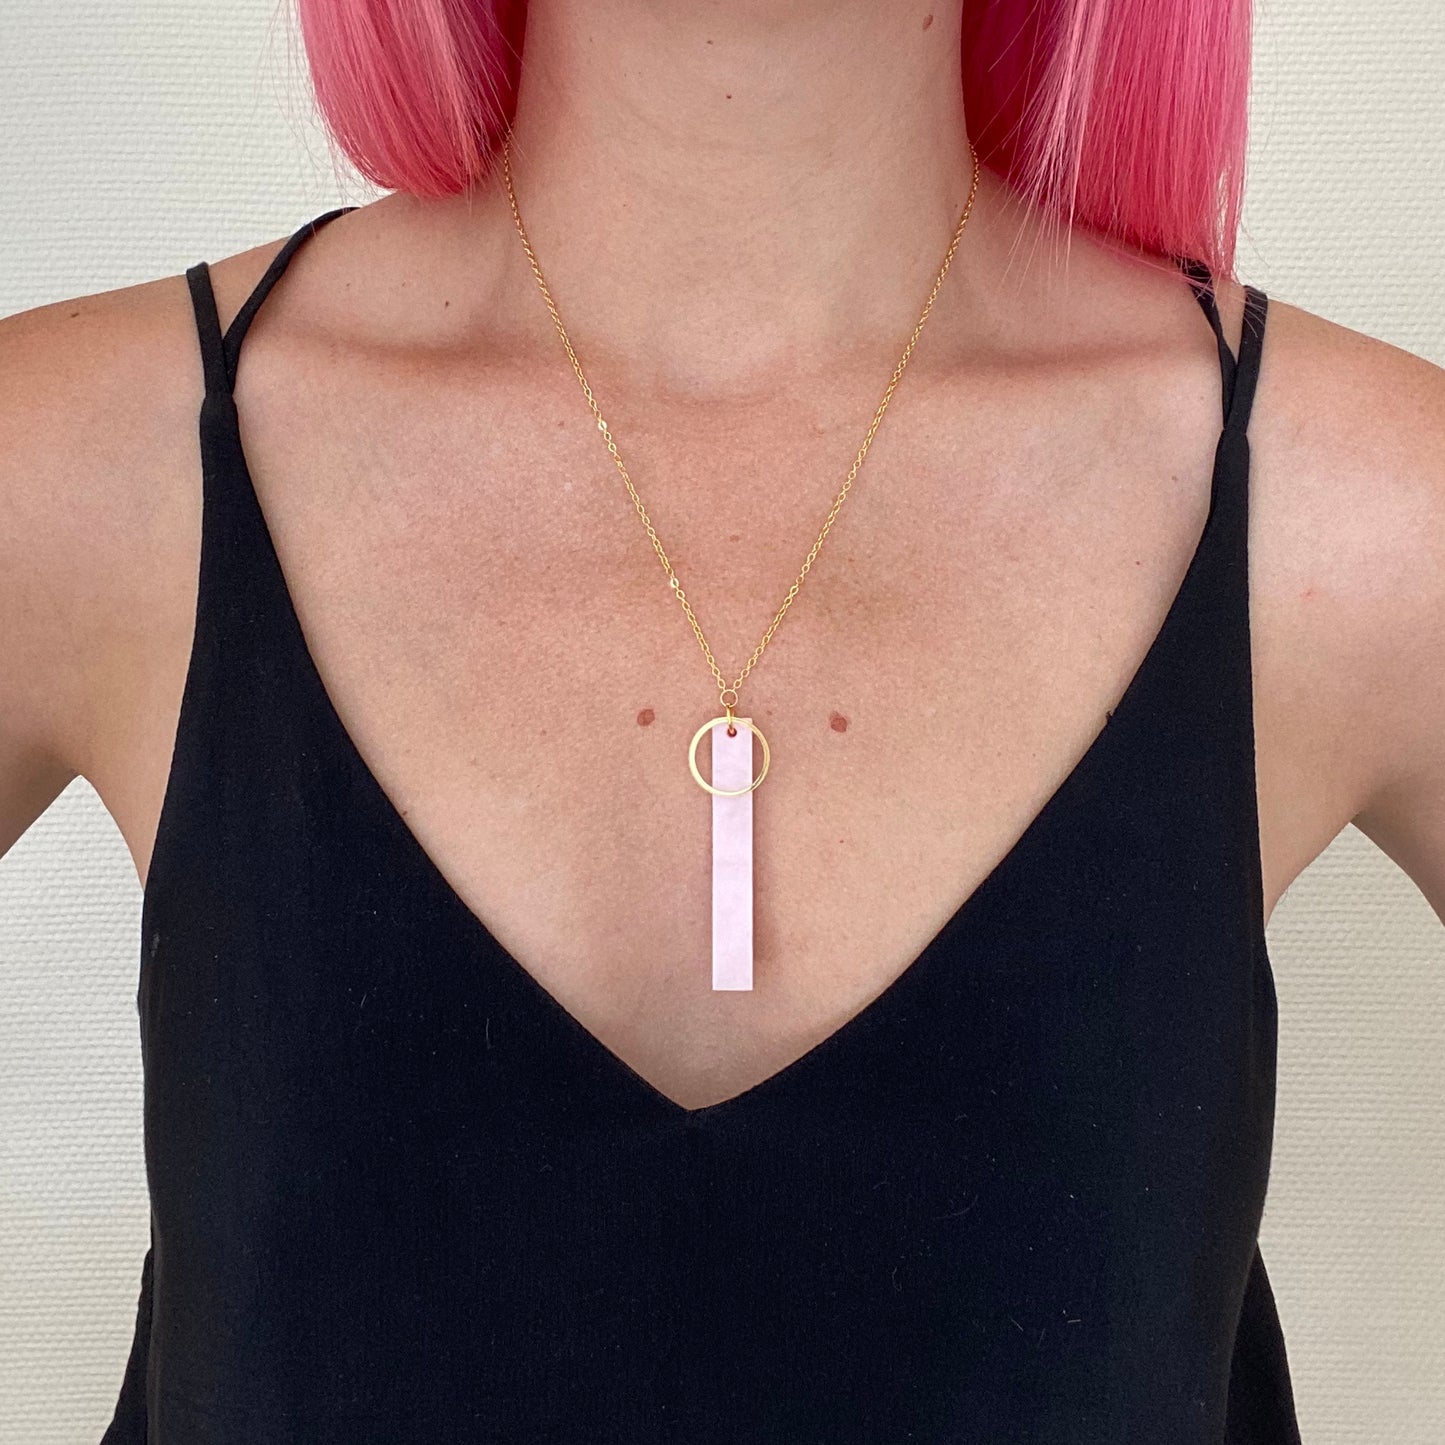 Rise Necklace- Pearlescent Pink Marble